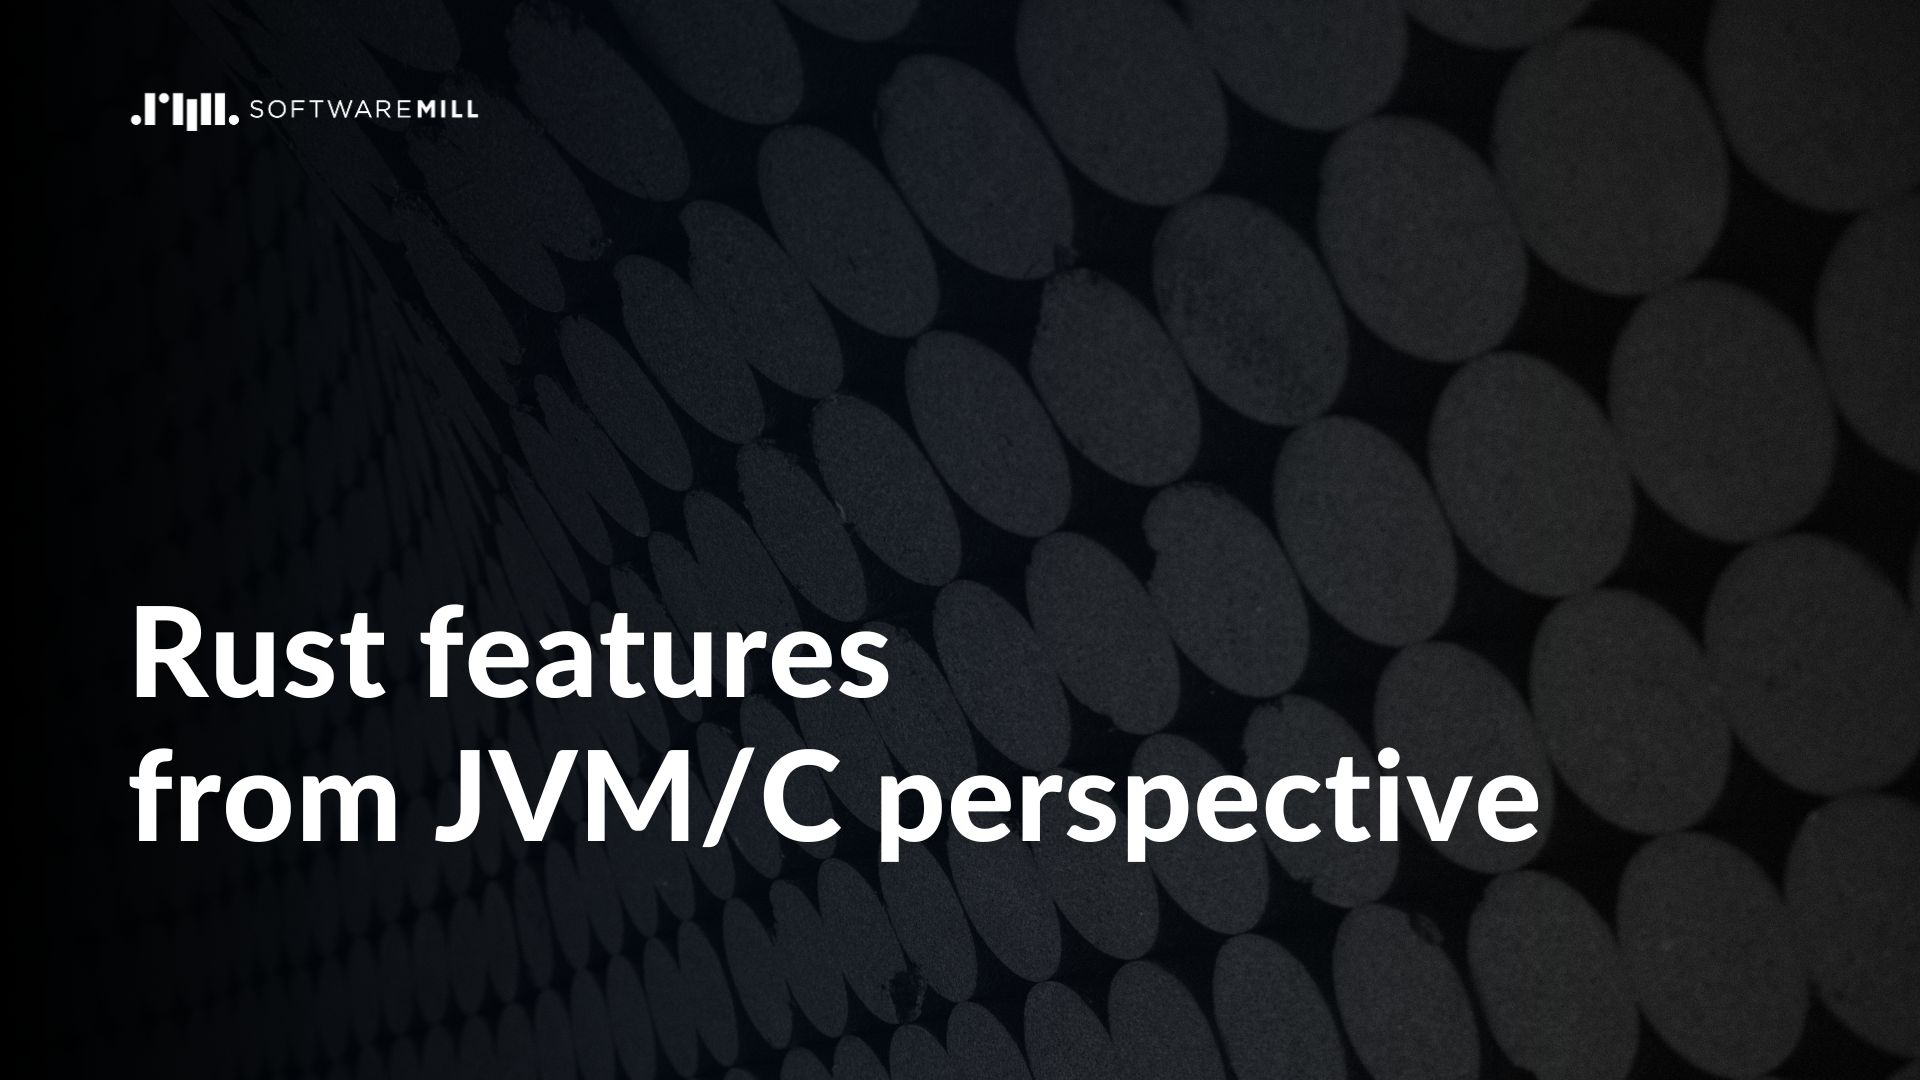 A few nice Rust features from JVM/C perspective webp image